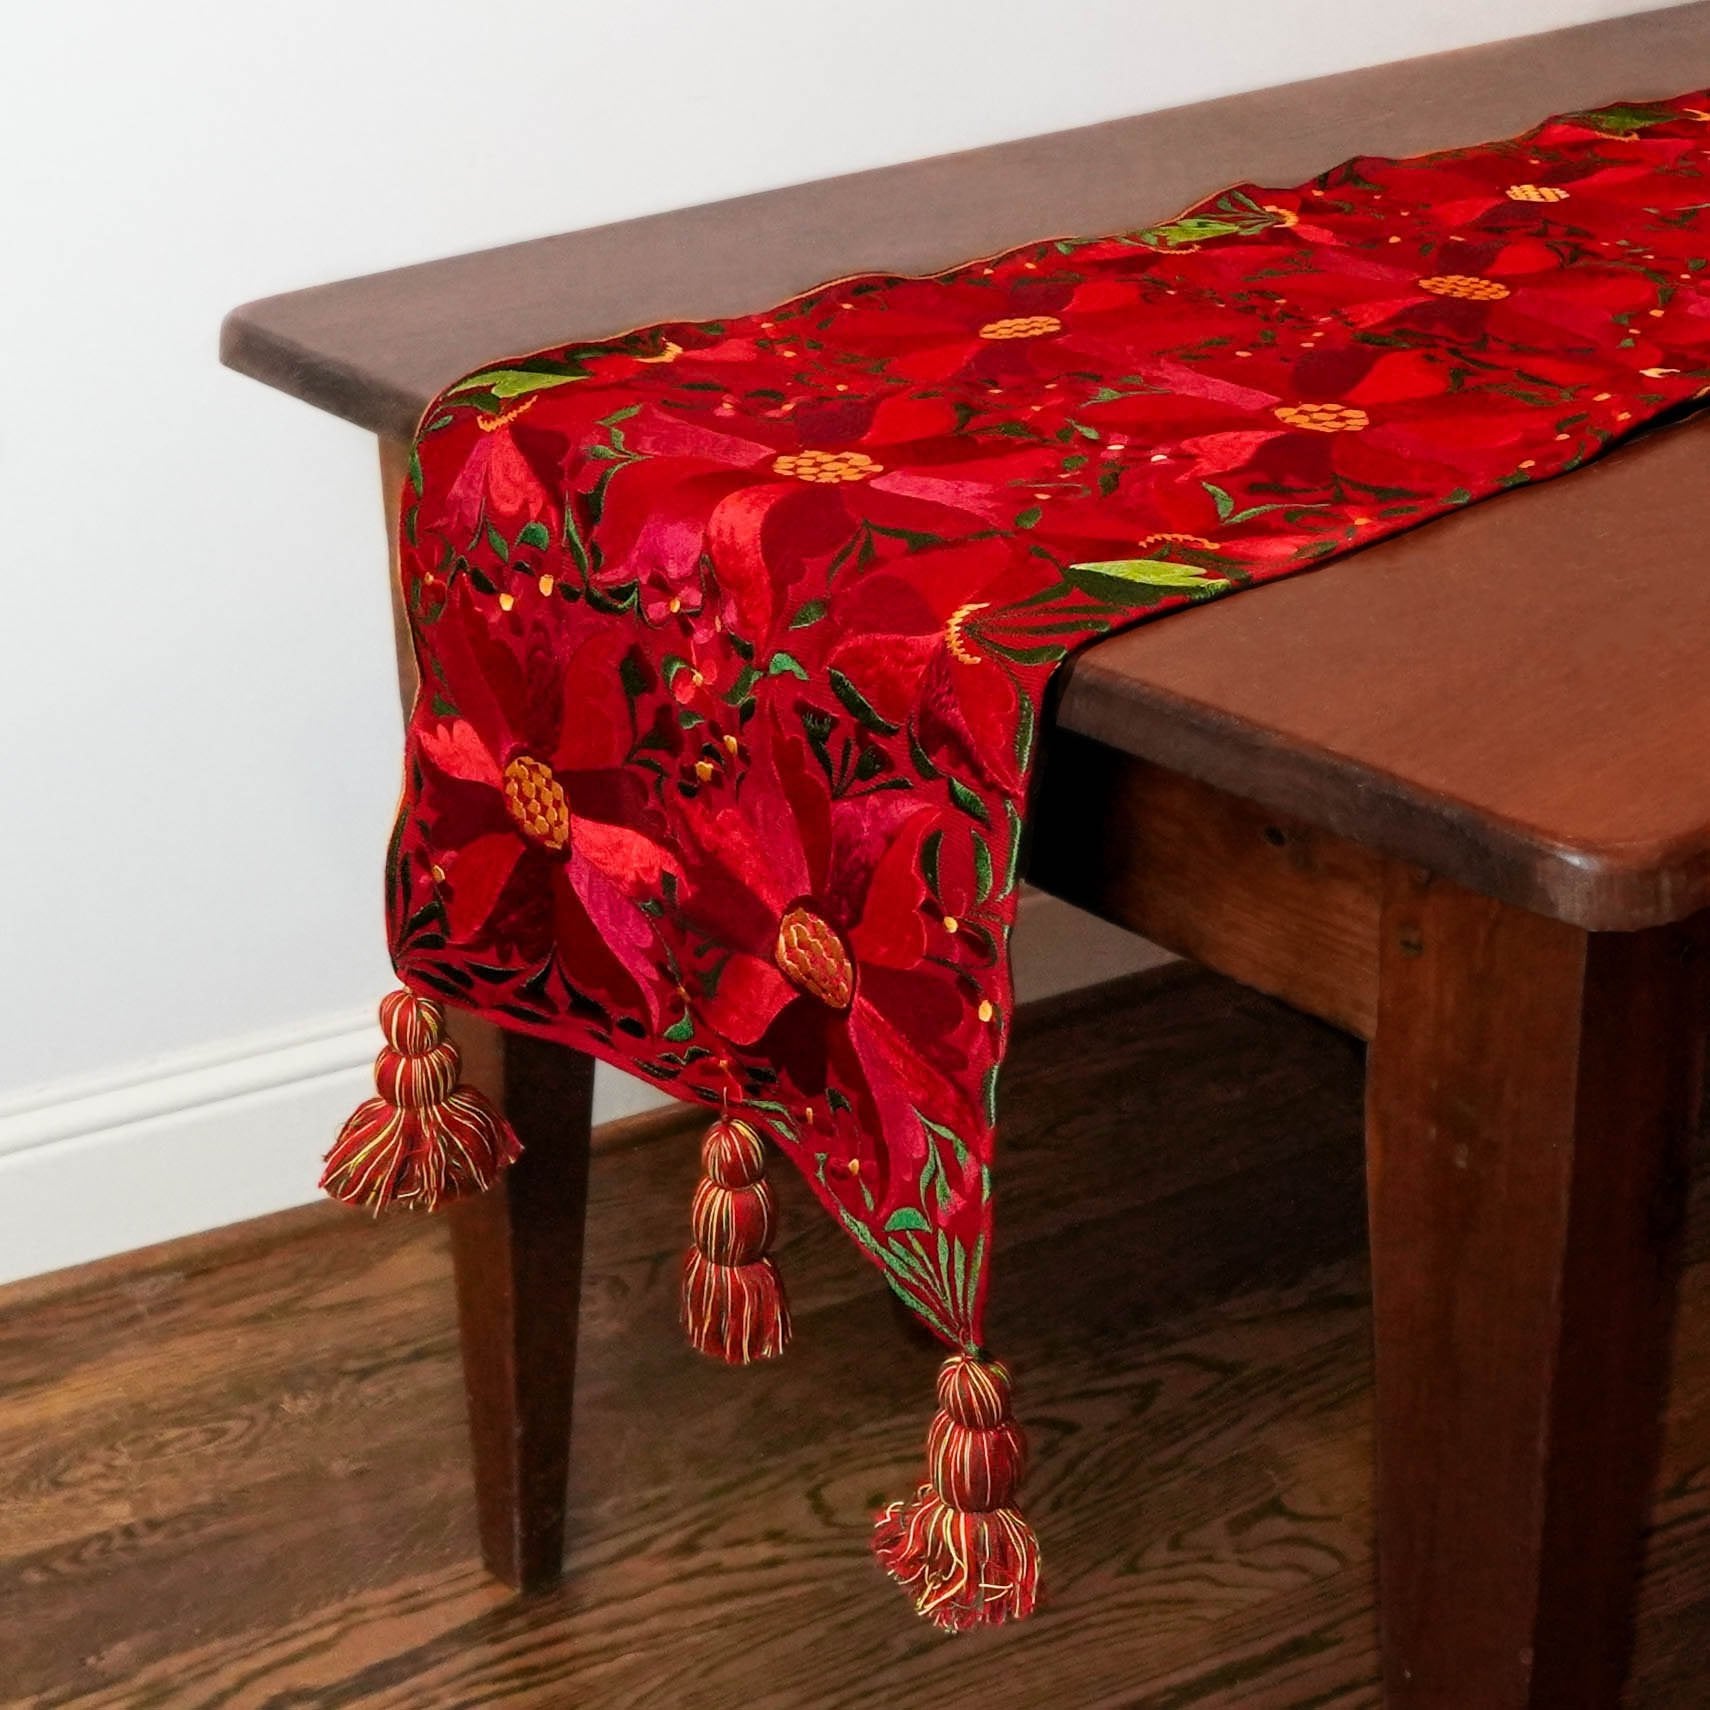 Red Poinsettia Floral Table Runner w/ Tassels